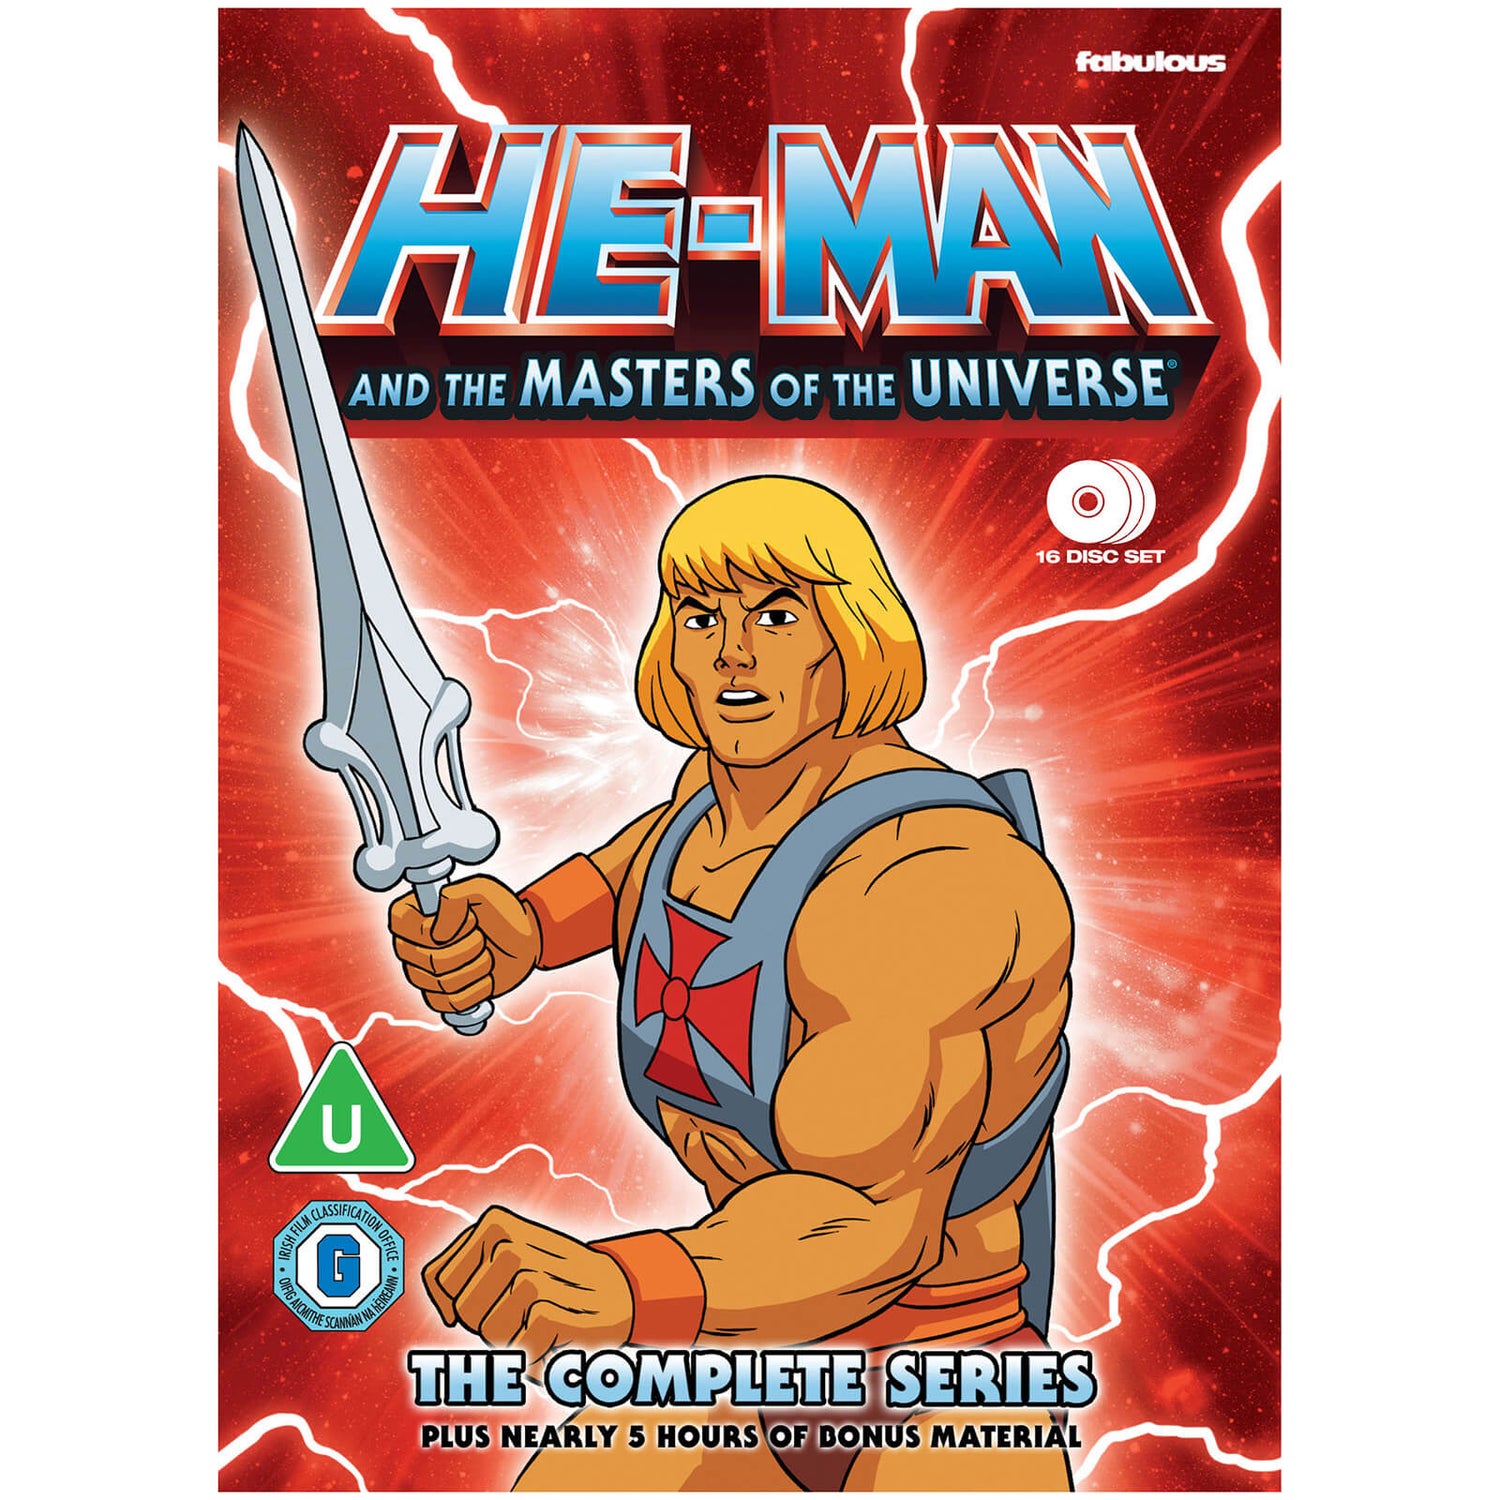 He-Man & The Masters of the Universe: The Complete Series